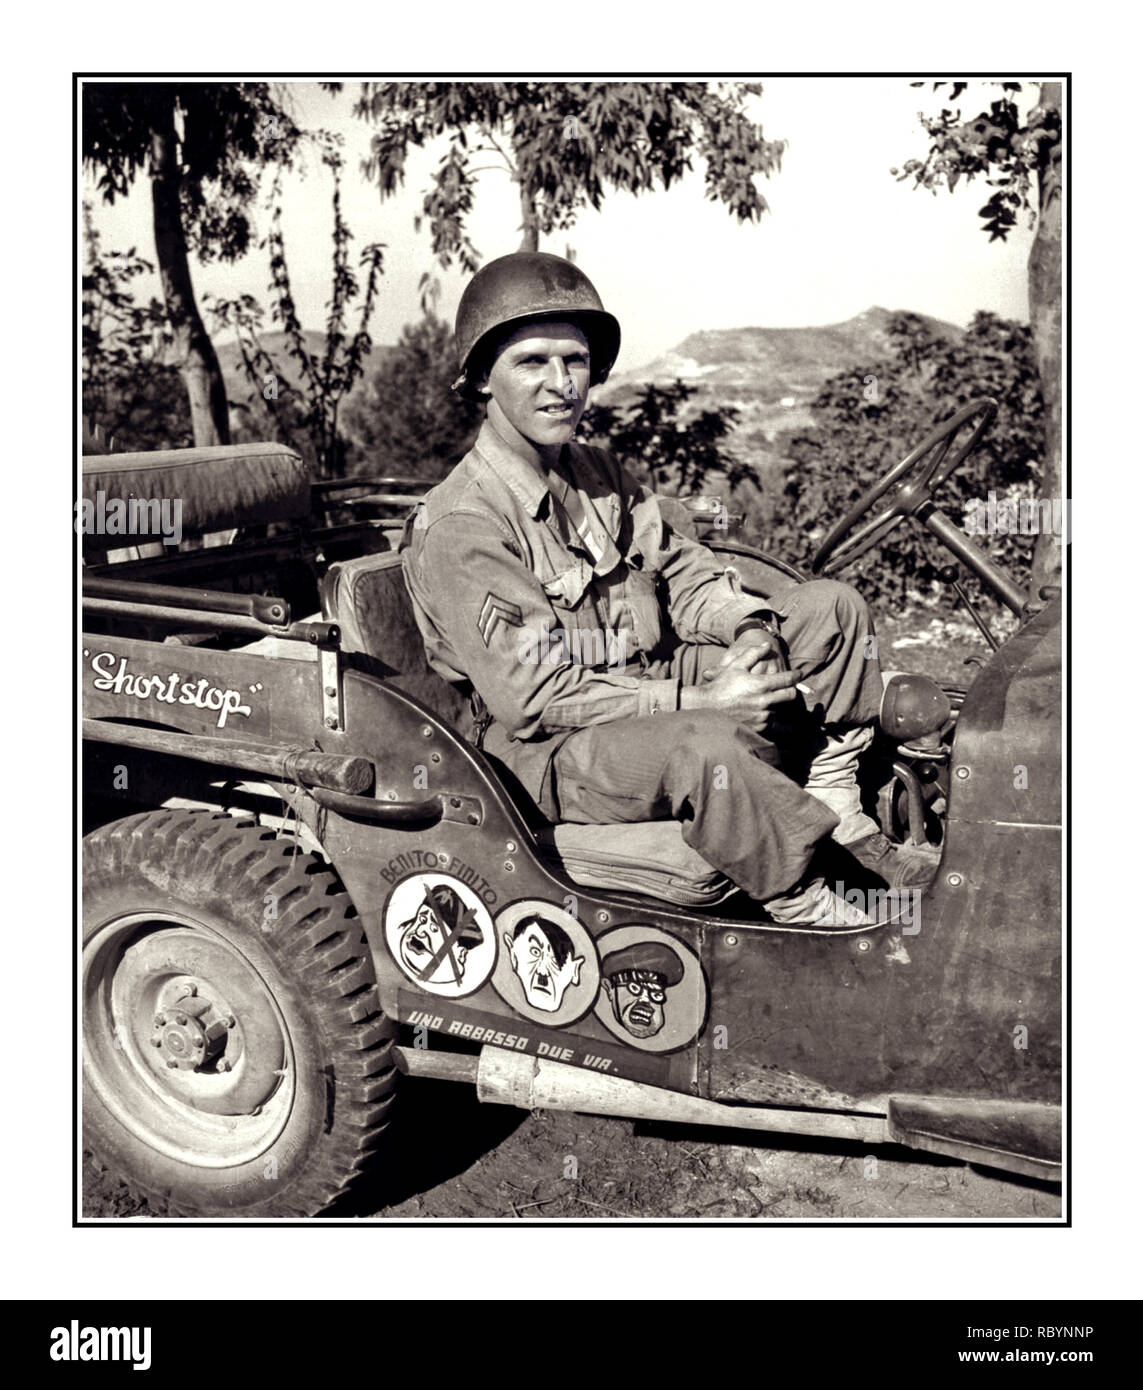 WW2 ITALY Archive war humour with an American GI soldier posing in a military Jeep in Italy which has painted amusing anti Axis cartoons of leaders of Evil – Benito Mussolini, Adolf Hitler and Hideaki Tojo – Prime Minister of Japan. Stock Photo